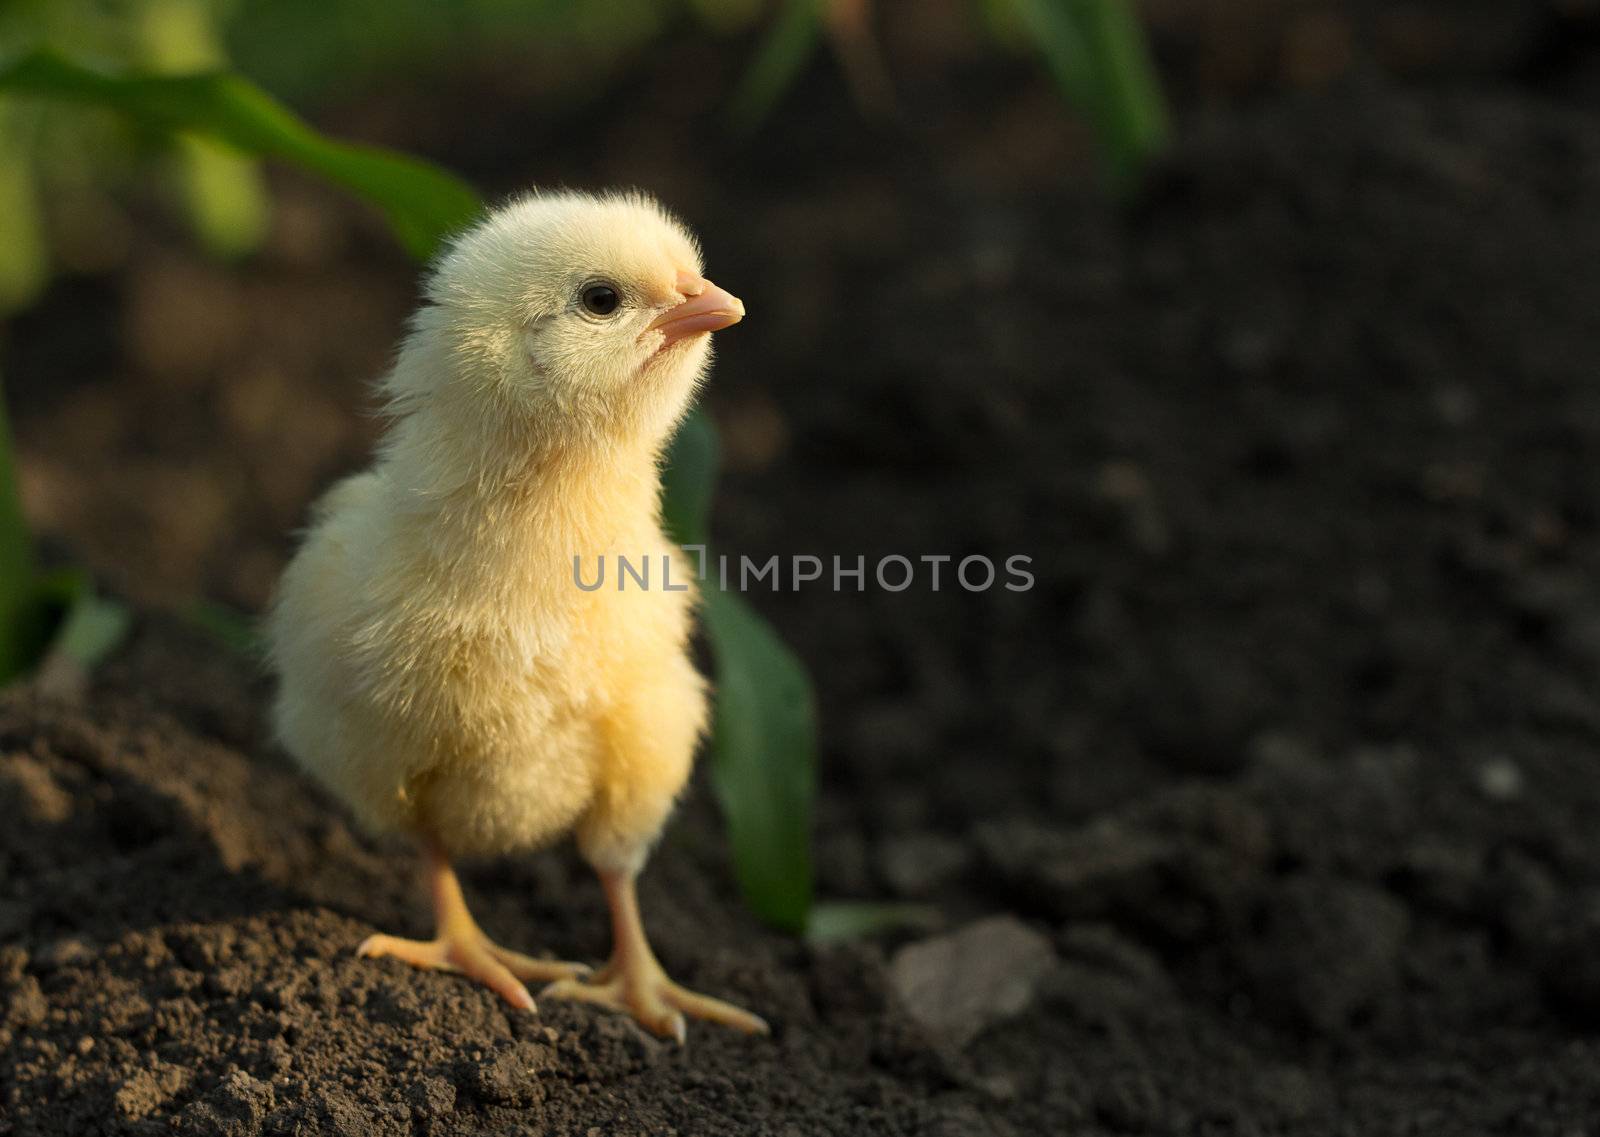 Concentrated little chicken by catalinr